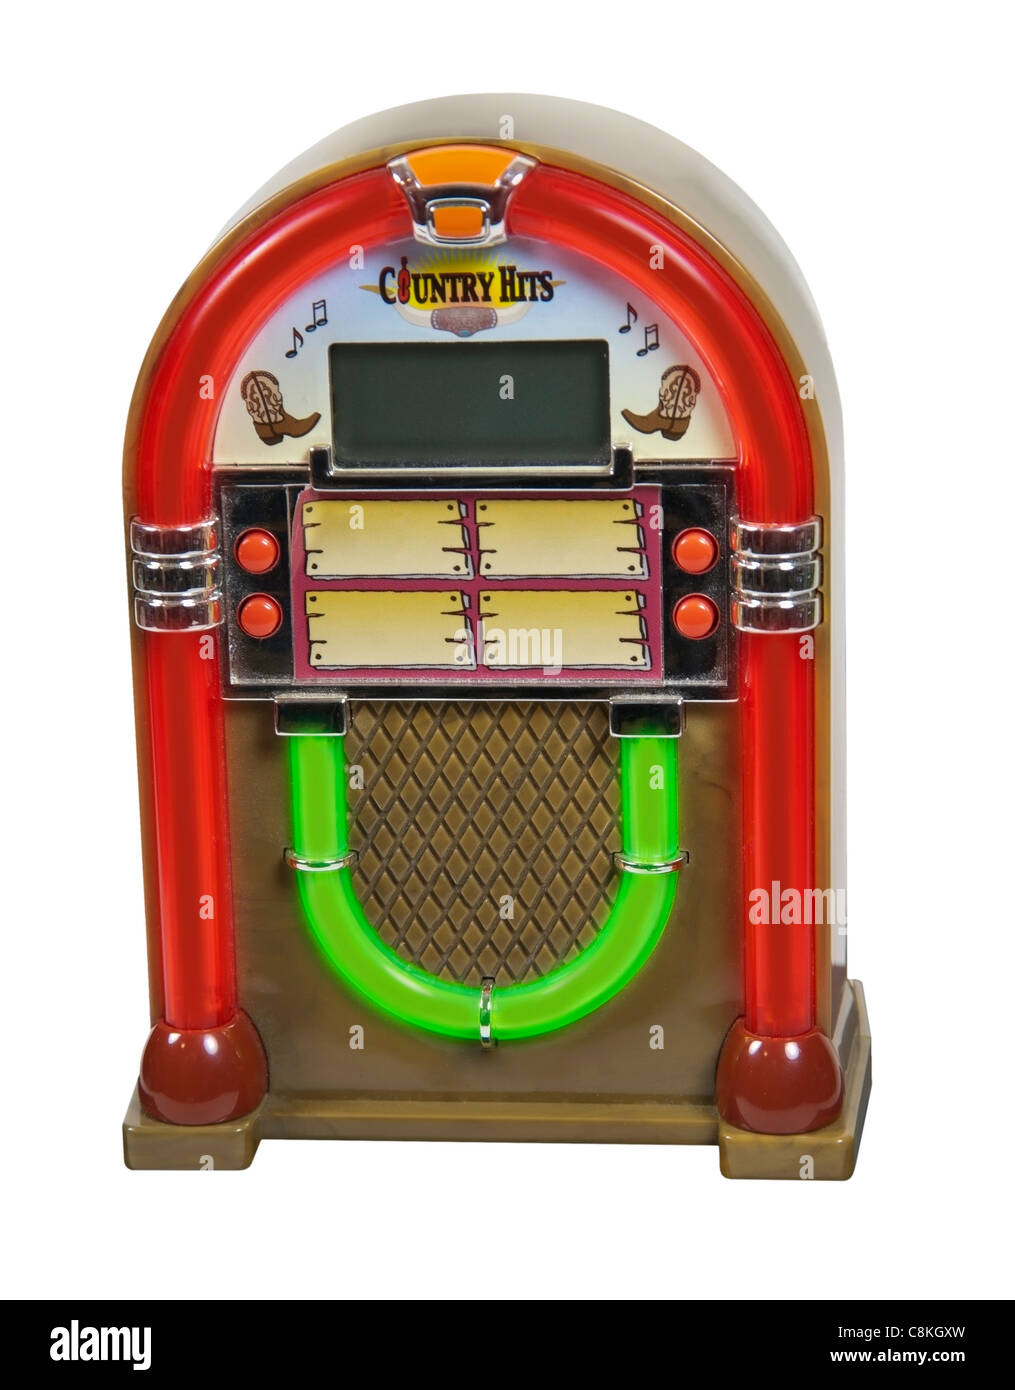 Old fashioned jukebox used to play records - path included Stock Photo